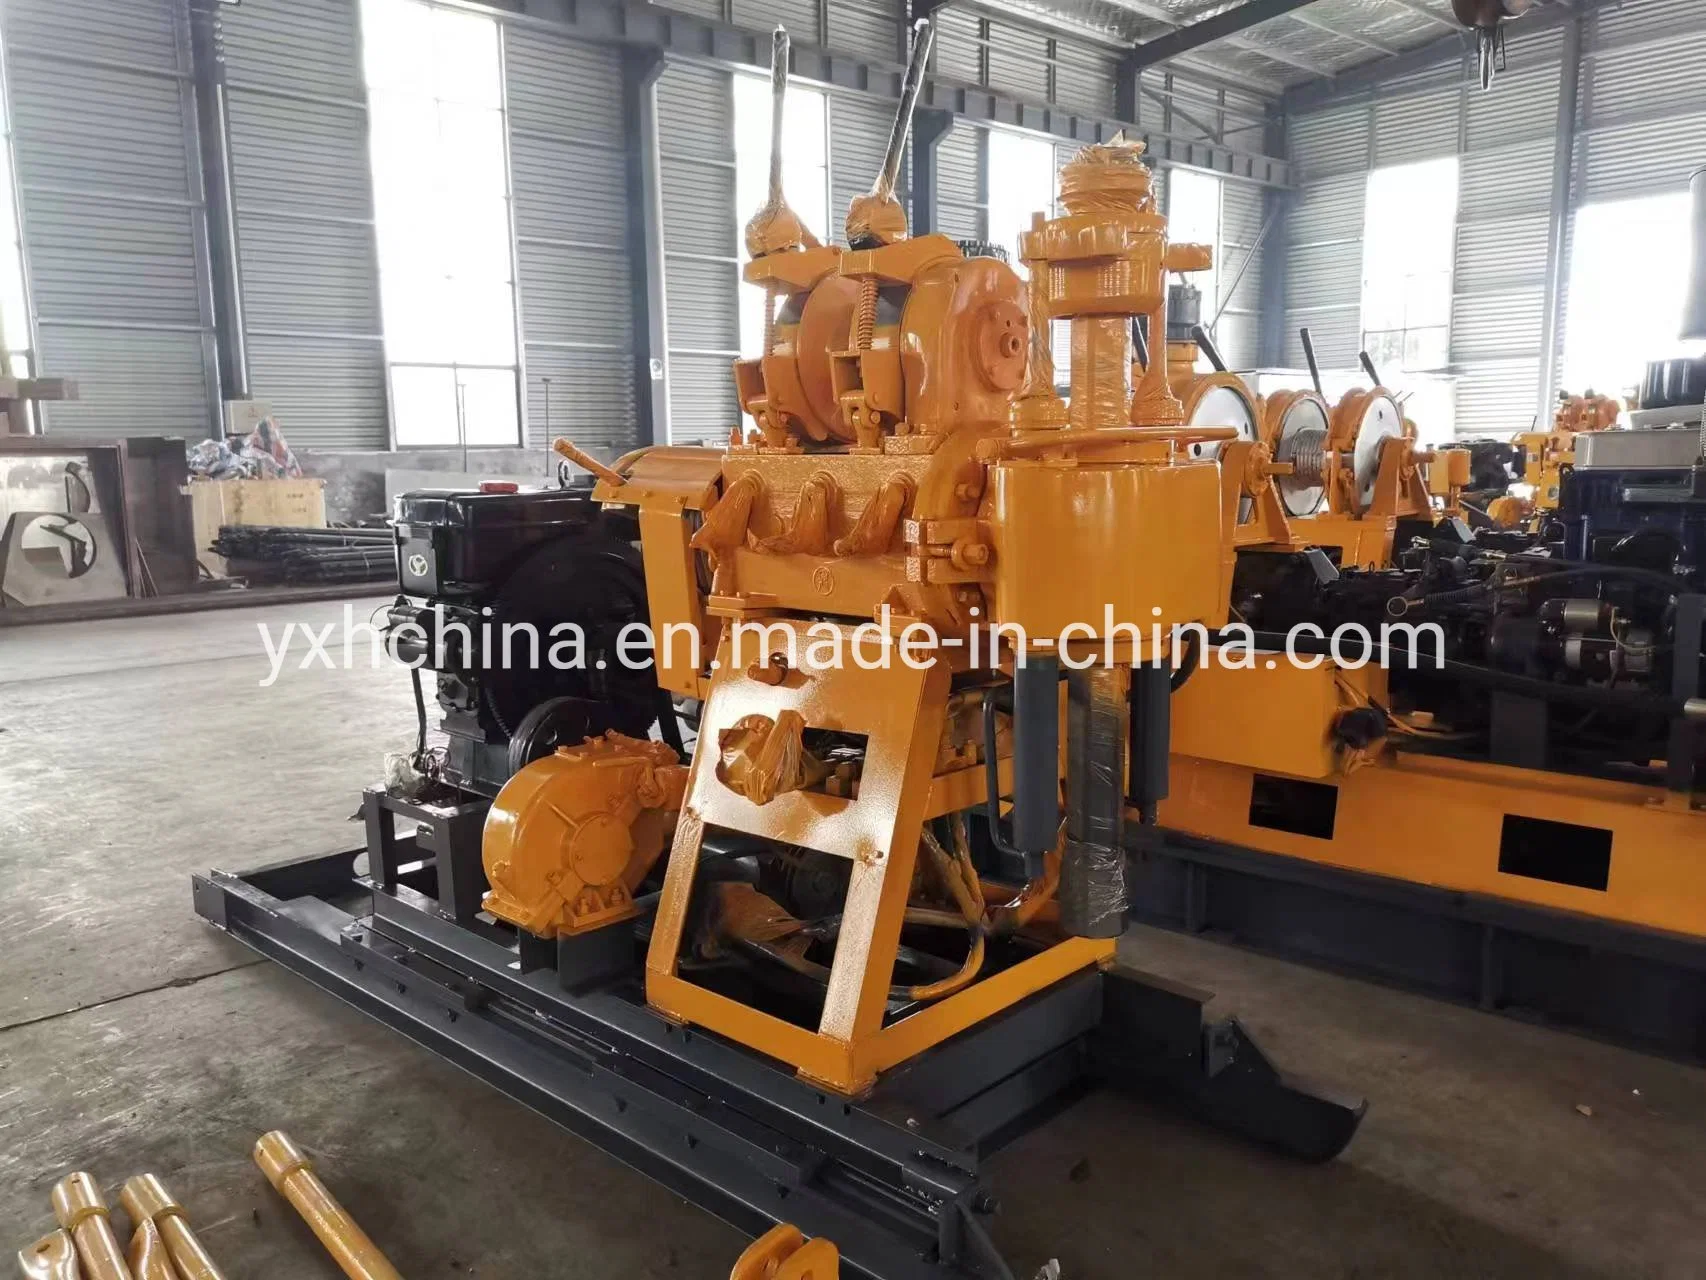 Hydraulic Anchor Hz200yy Geological Core Drilling Rig with Slide Easy to Operate